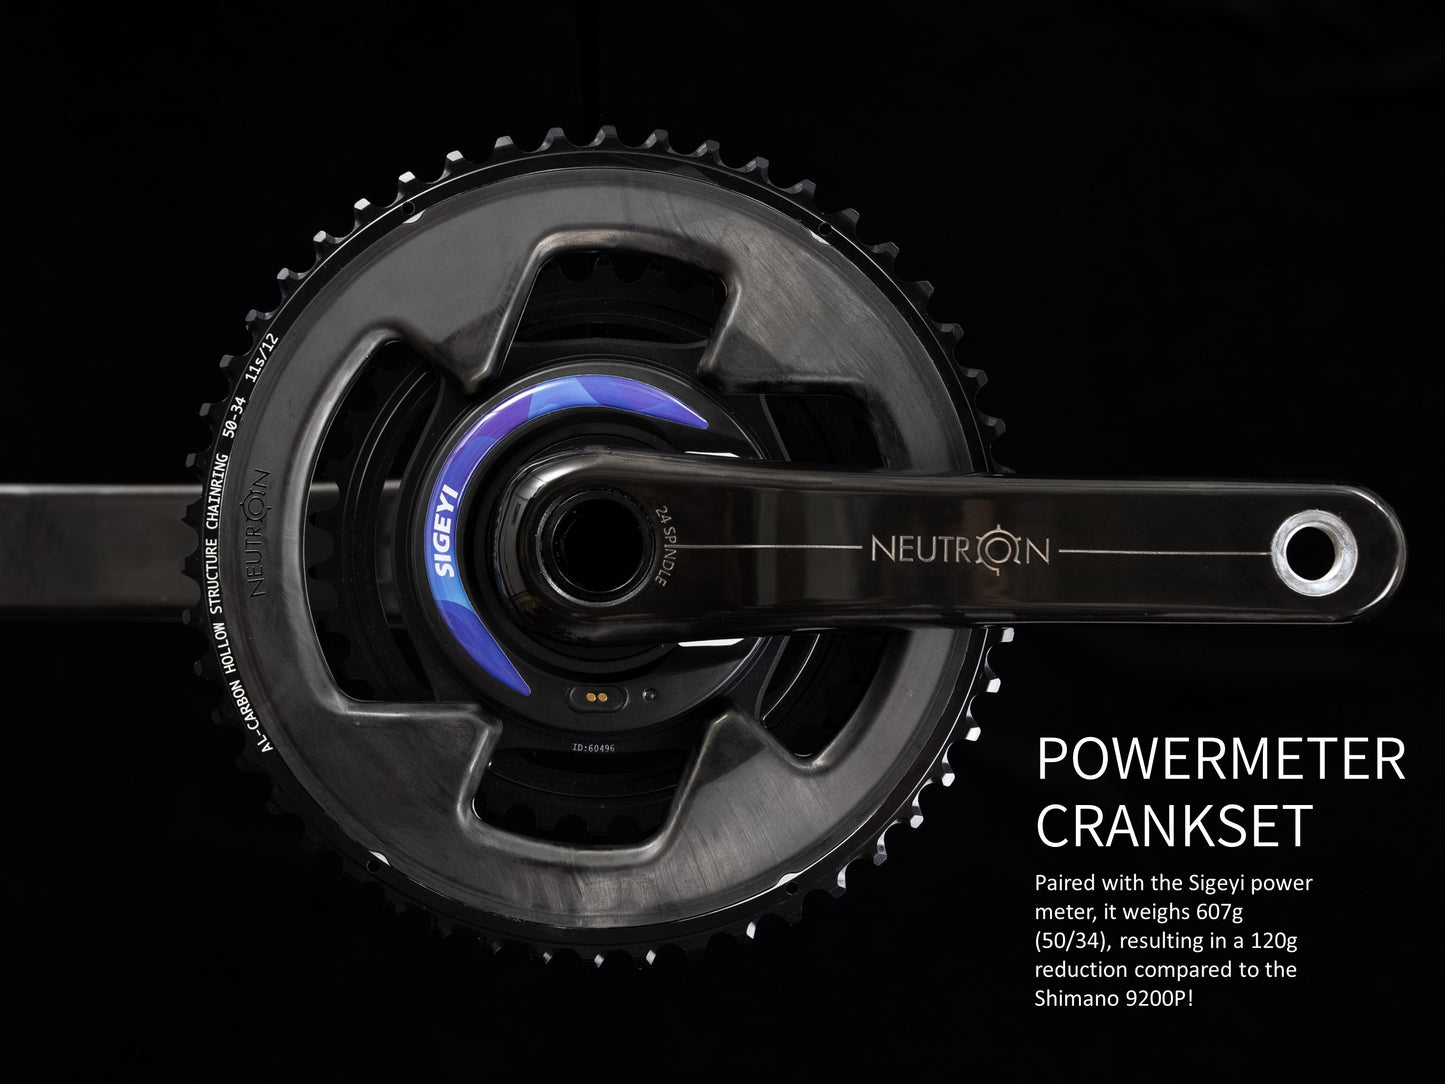 Crankset with SIGEYI Power Meter